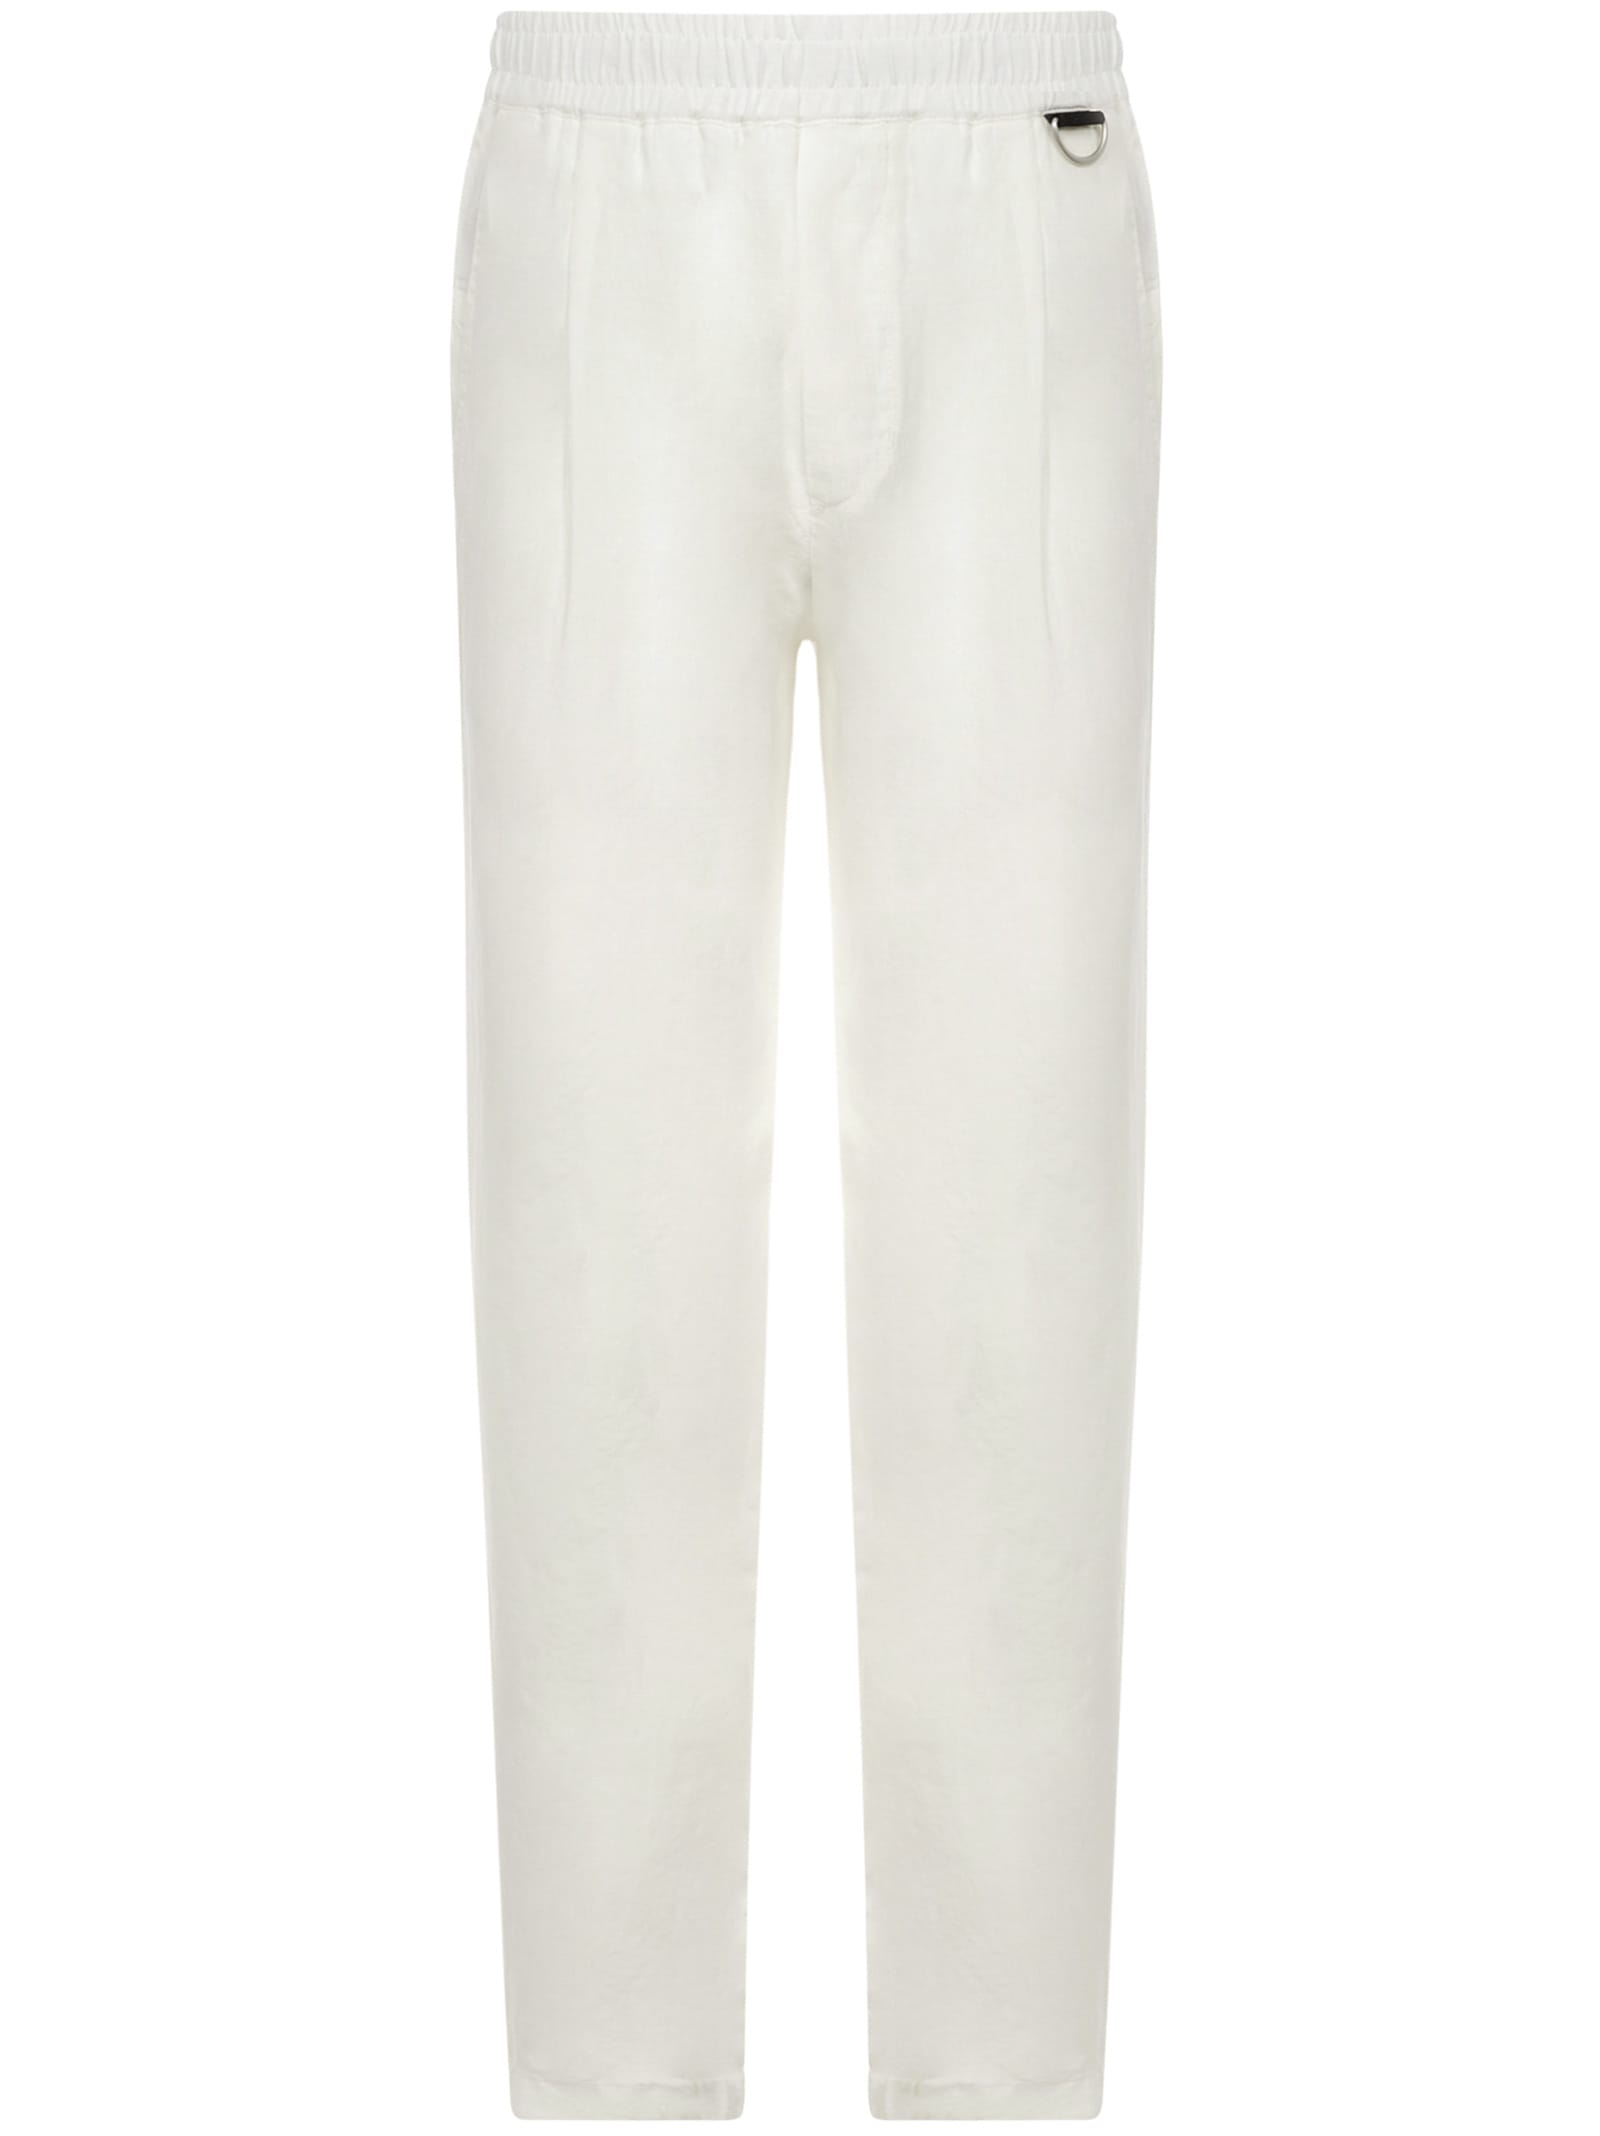 LOW BRAND TOKIO TROUSERS,L1PSS215716 A001